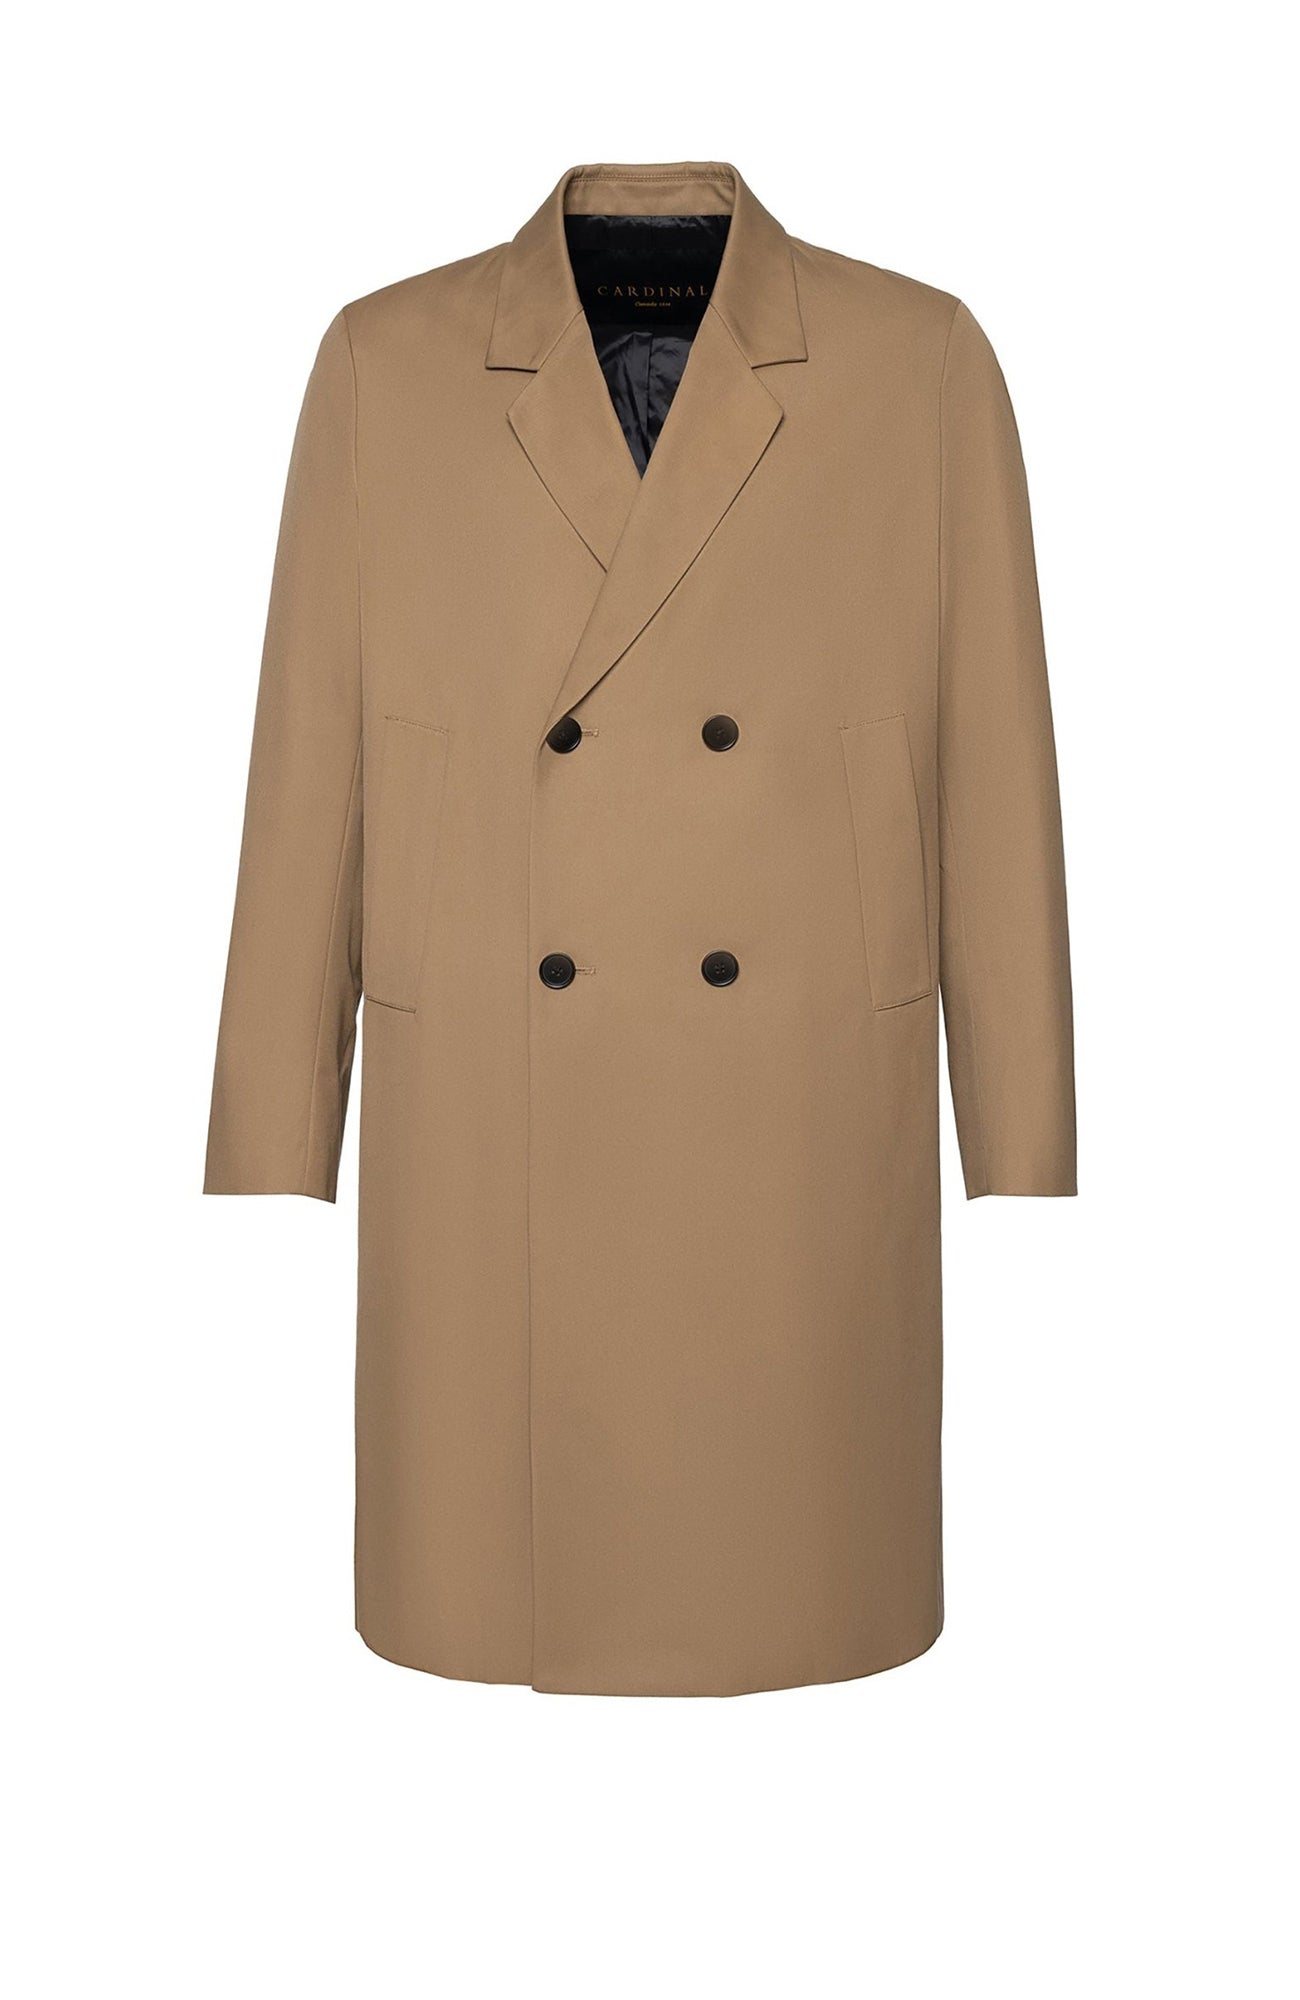 SCOTTSDALE DOUBLE BREAST RELAXED TOPCOAT - Cardinal of Canada-CA - SCOTTSDALE DOUBLE BREAST RELAXED TOPCOAT 41.5 inch length